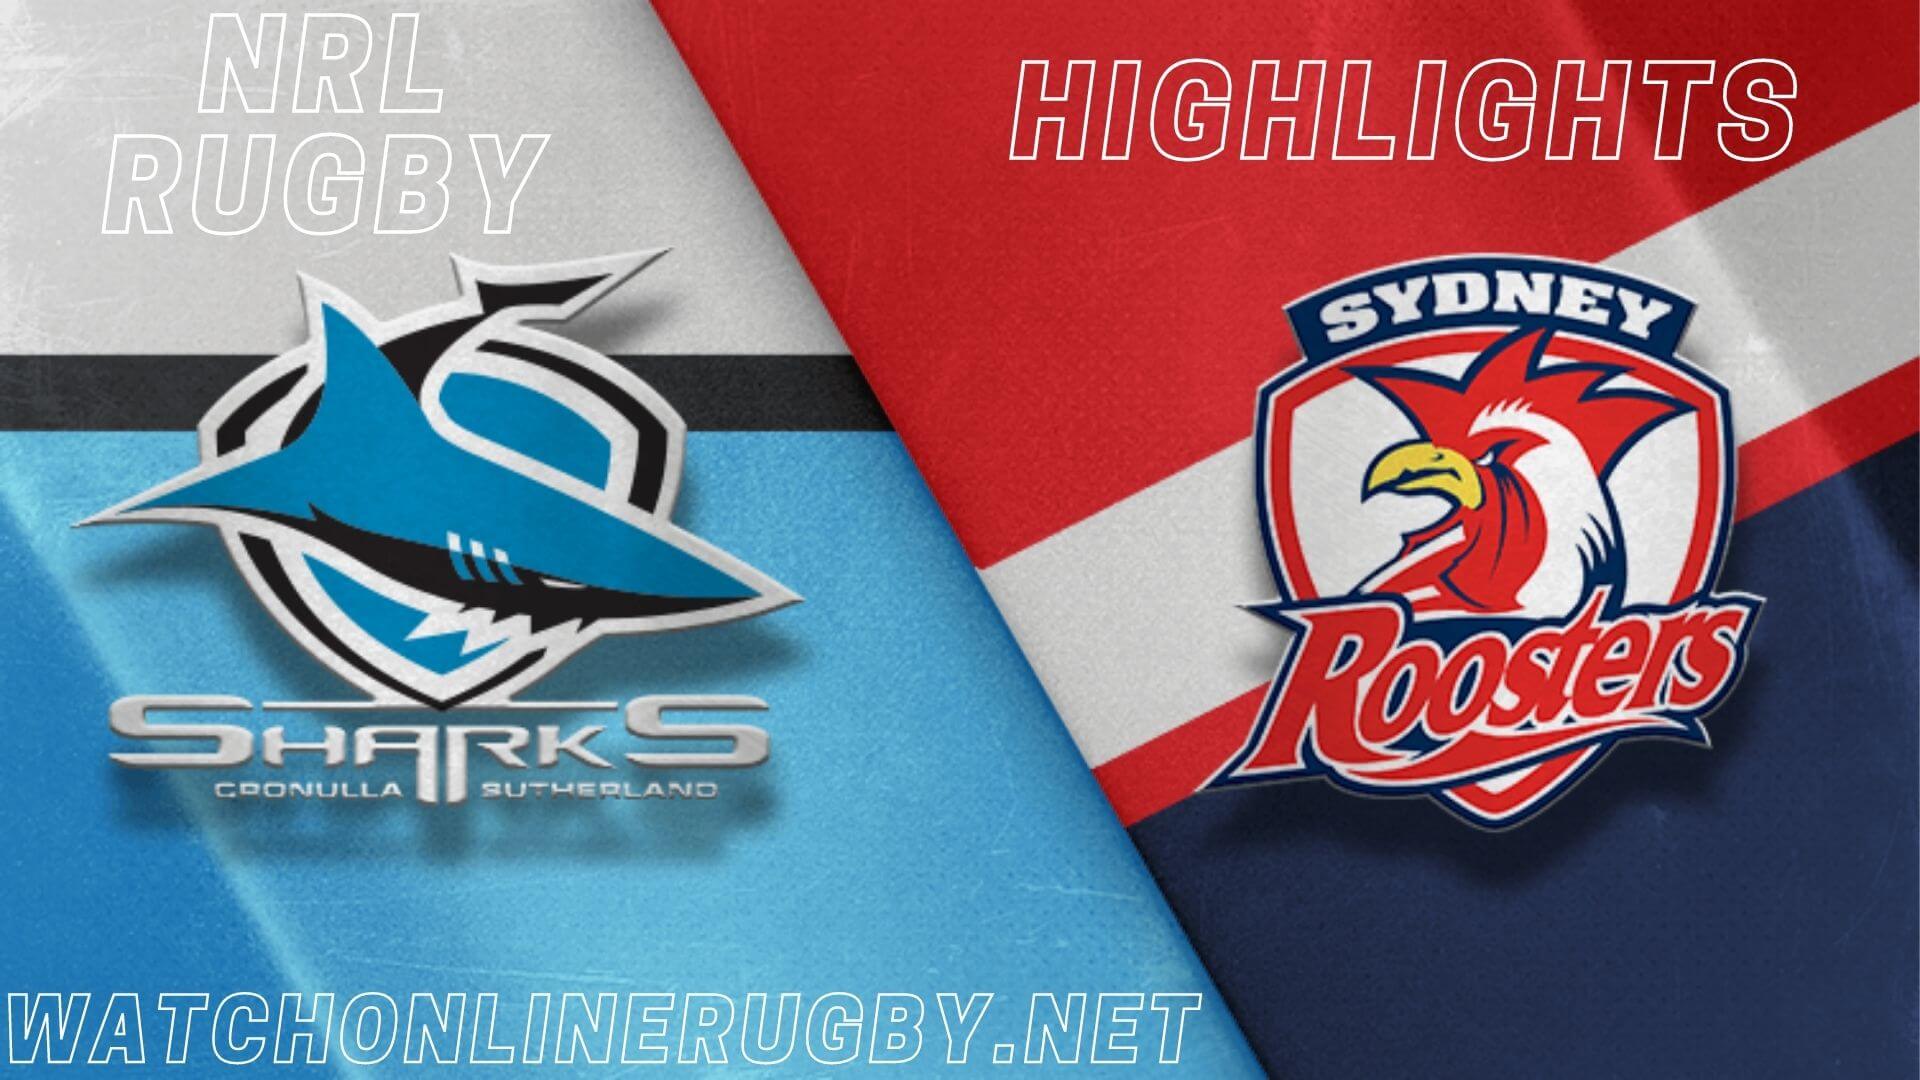 Sharks Vs Roosters Highlights RD 12 NRL Rugby